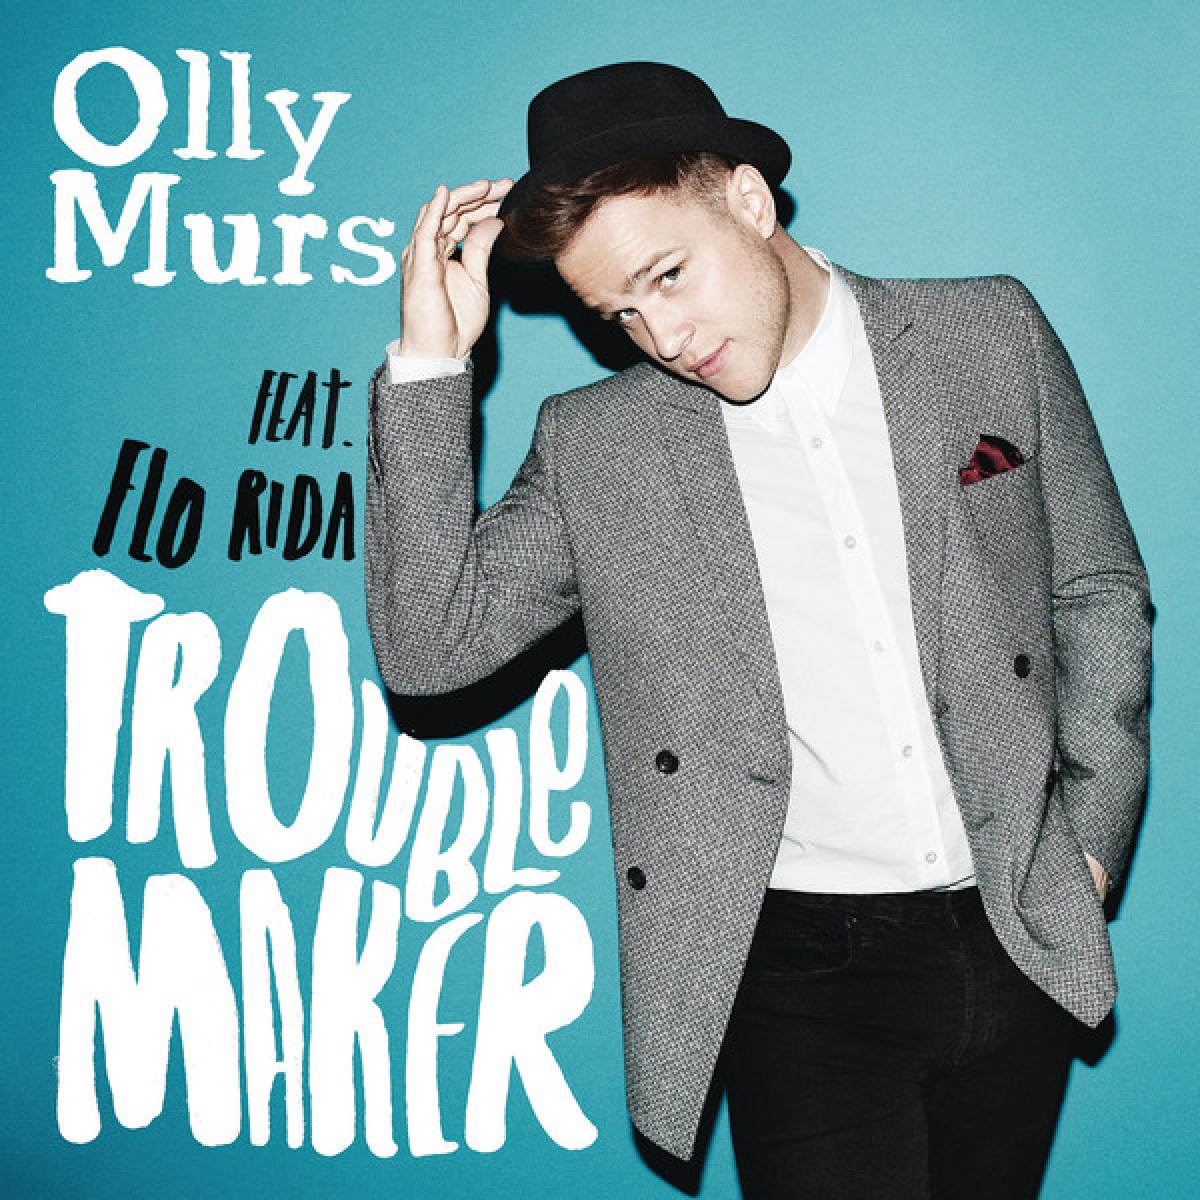 OLLY MURS - Troublemaker (feat. Flo Rida)